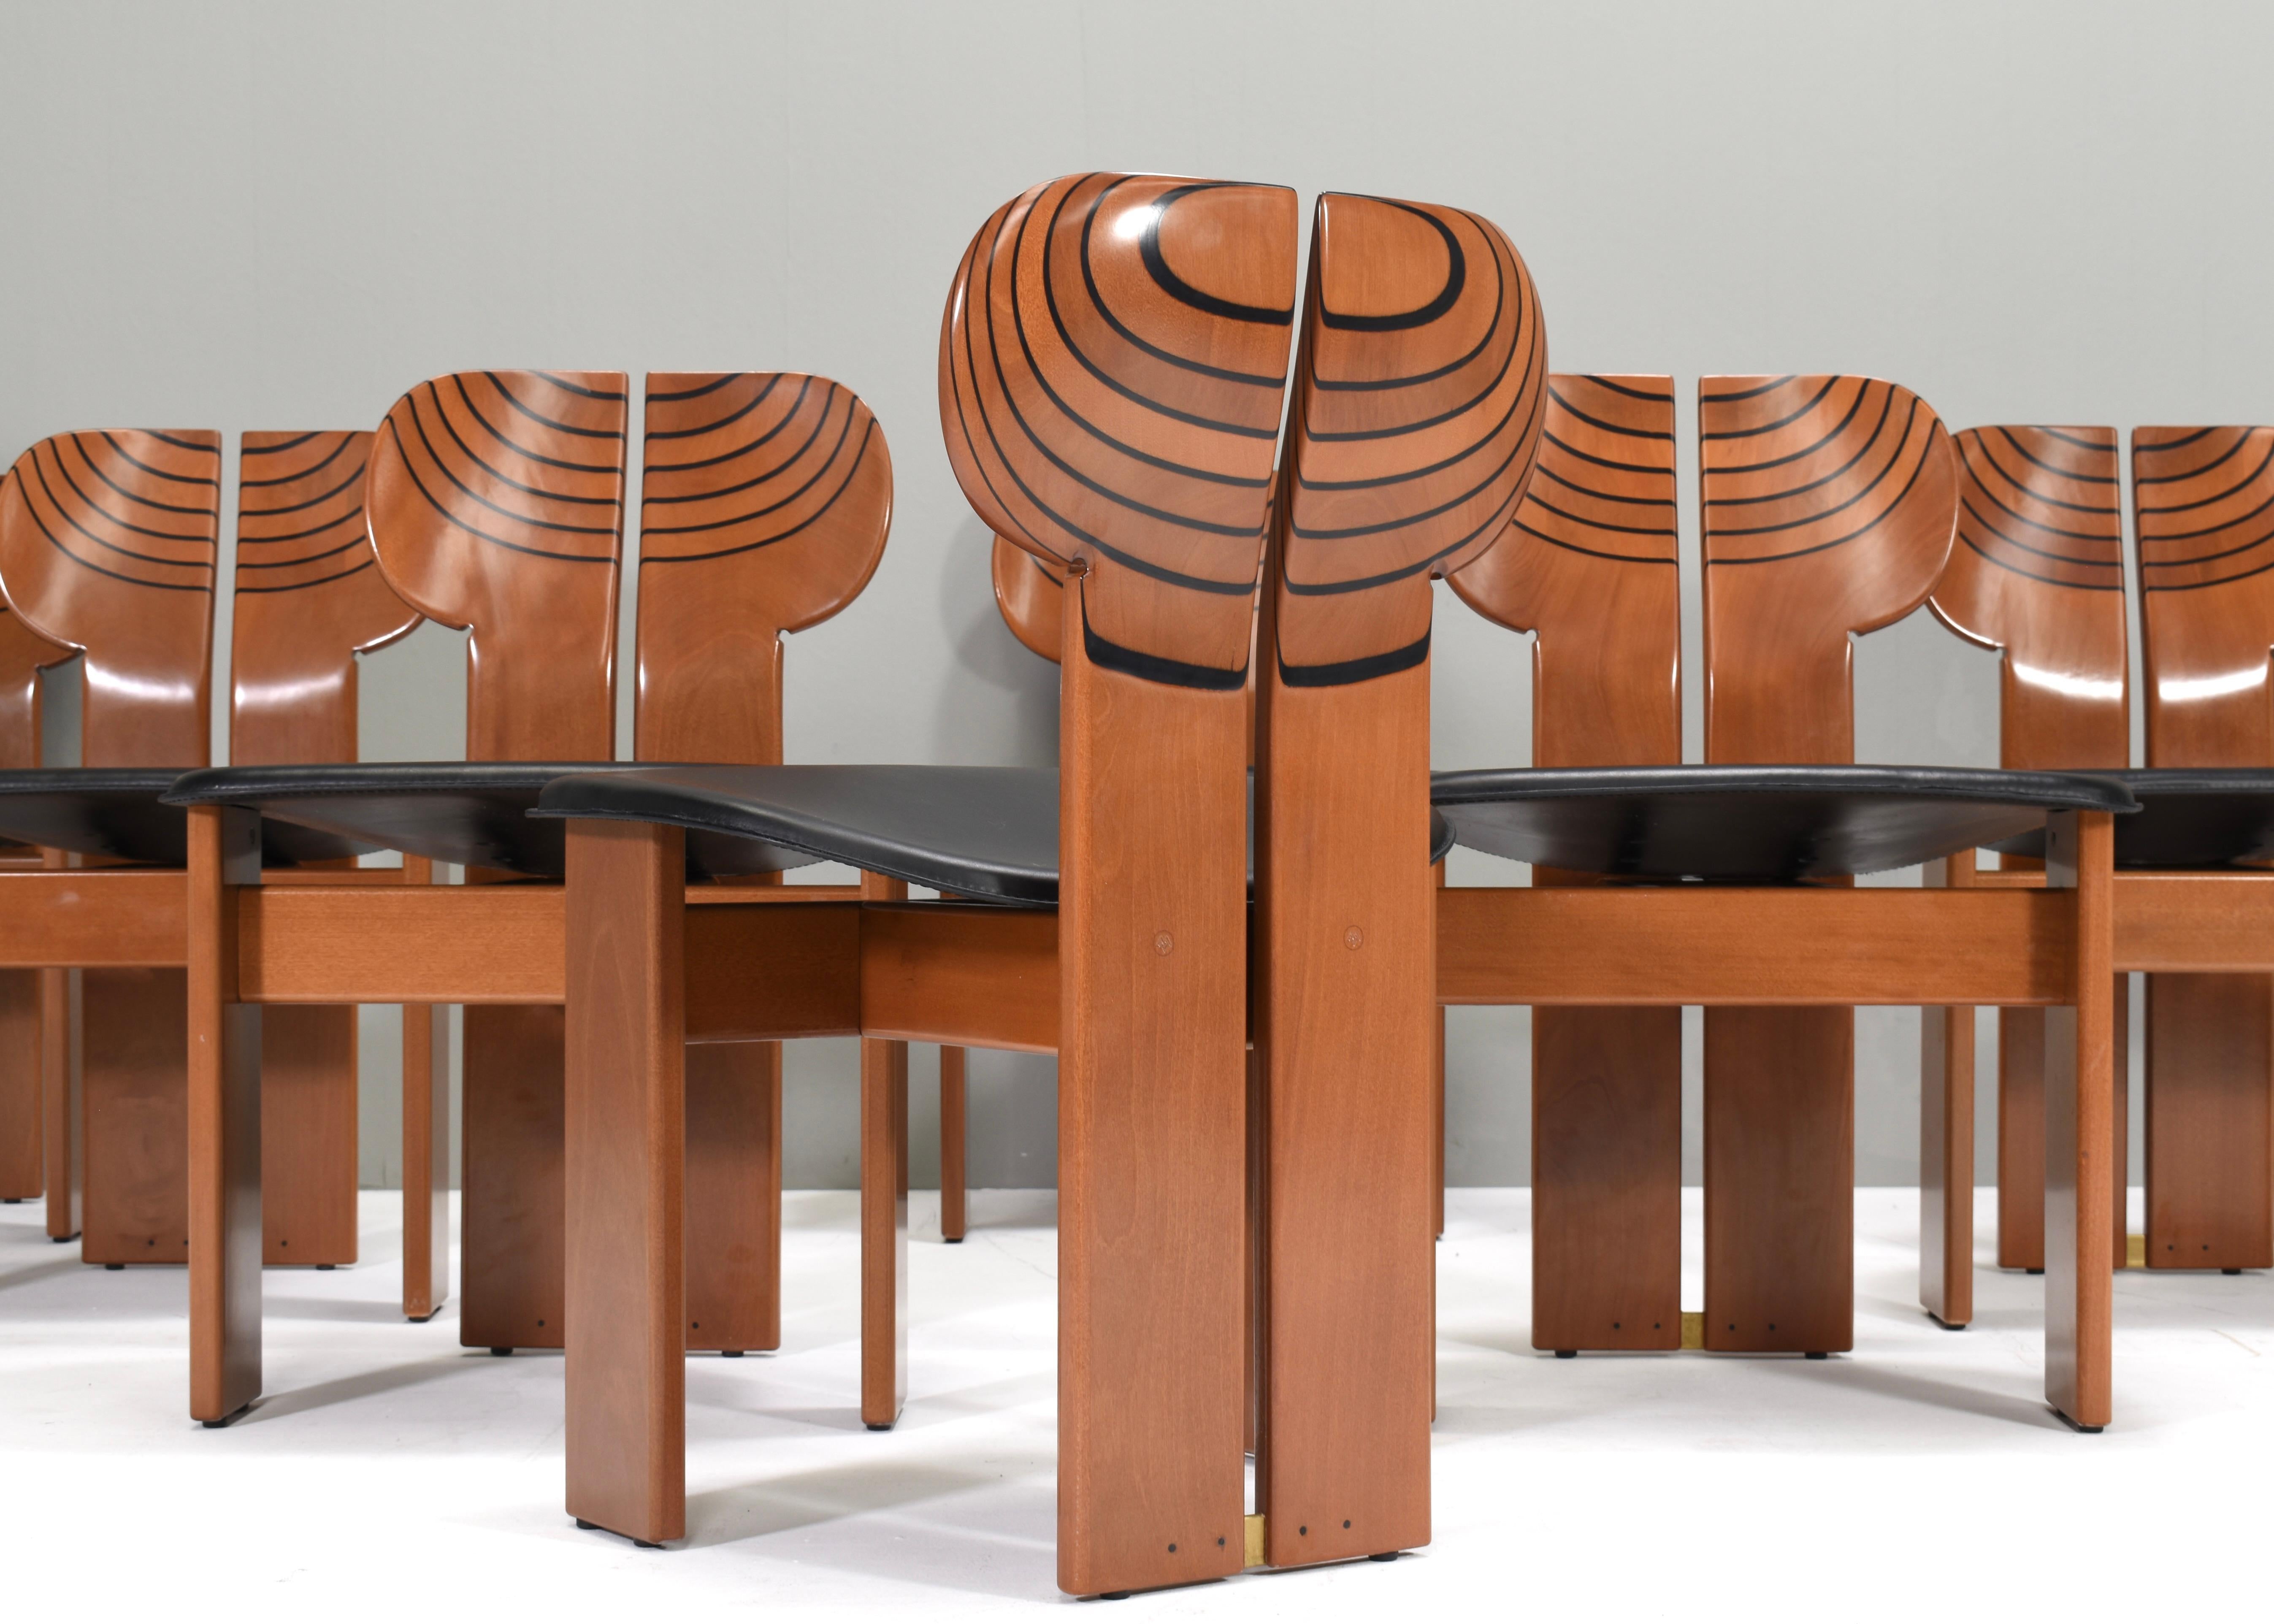 Africa Chairs by Afra & Tobia Scarpa for Maxalto, Italy - 1975, set of 8  For Sale 3